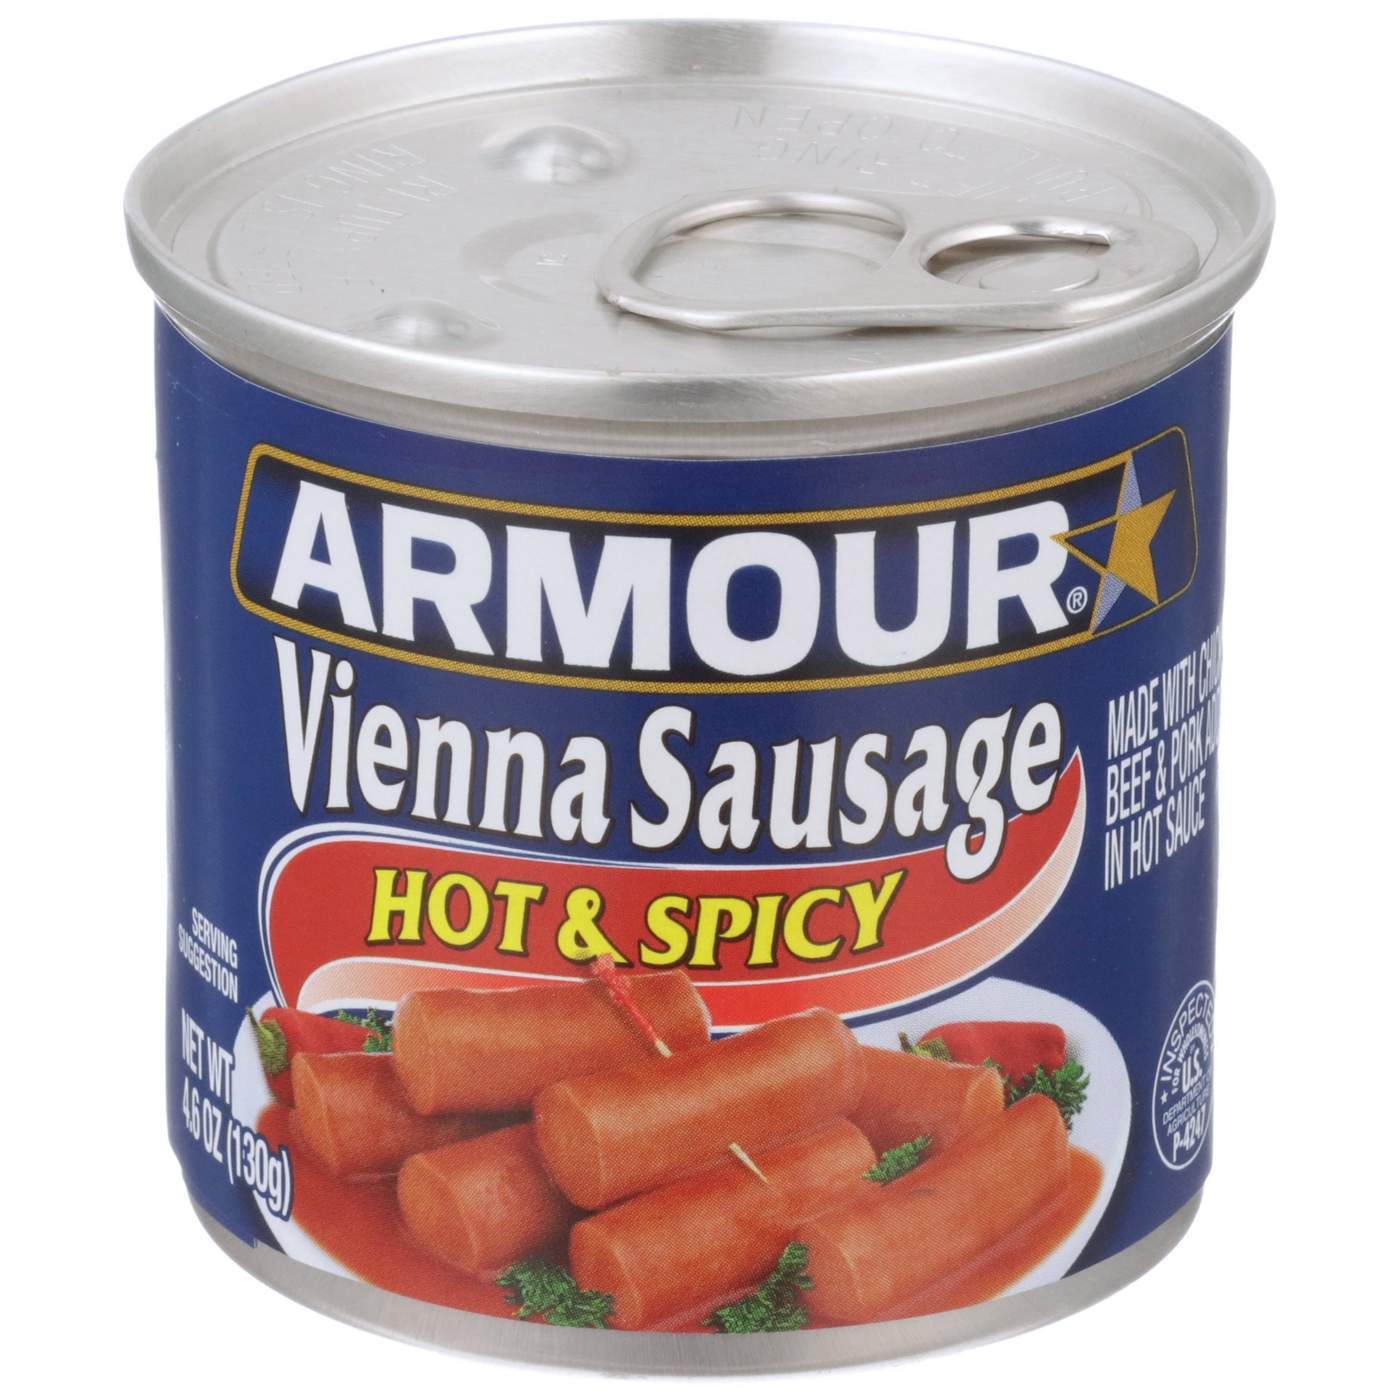 Armour Hot & Spicy Flavored Vienna Sausage Canned Sausage; image 1 of 4